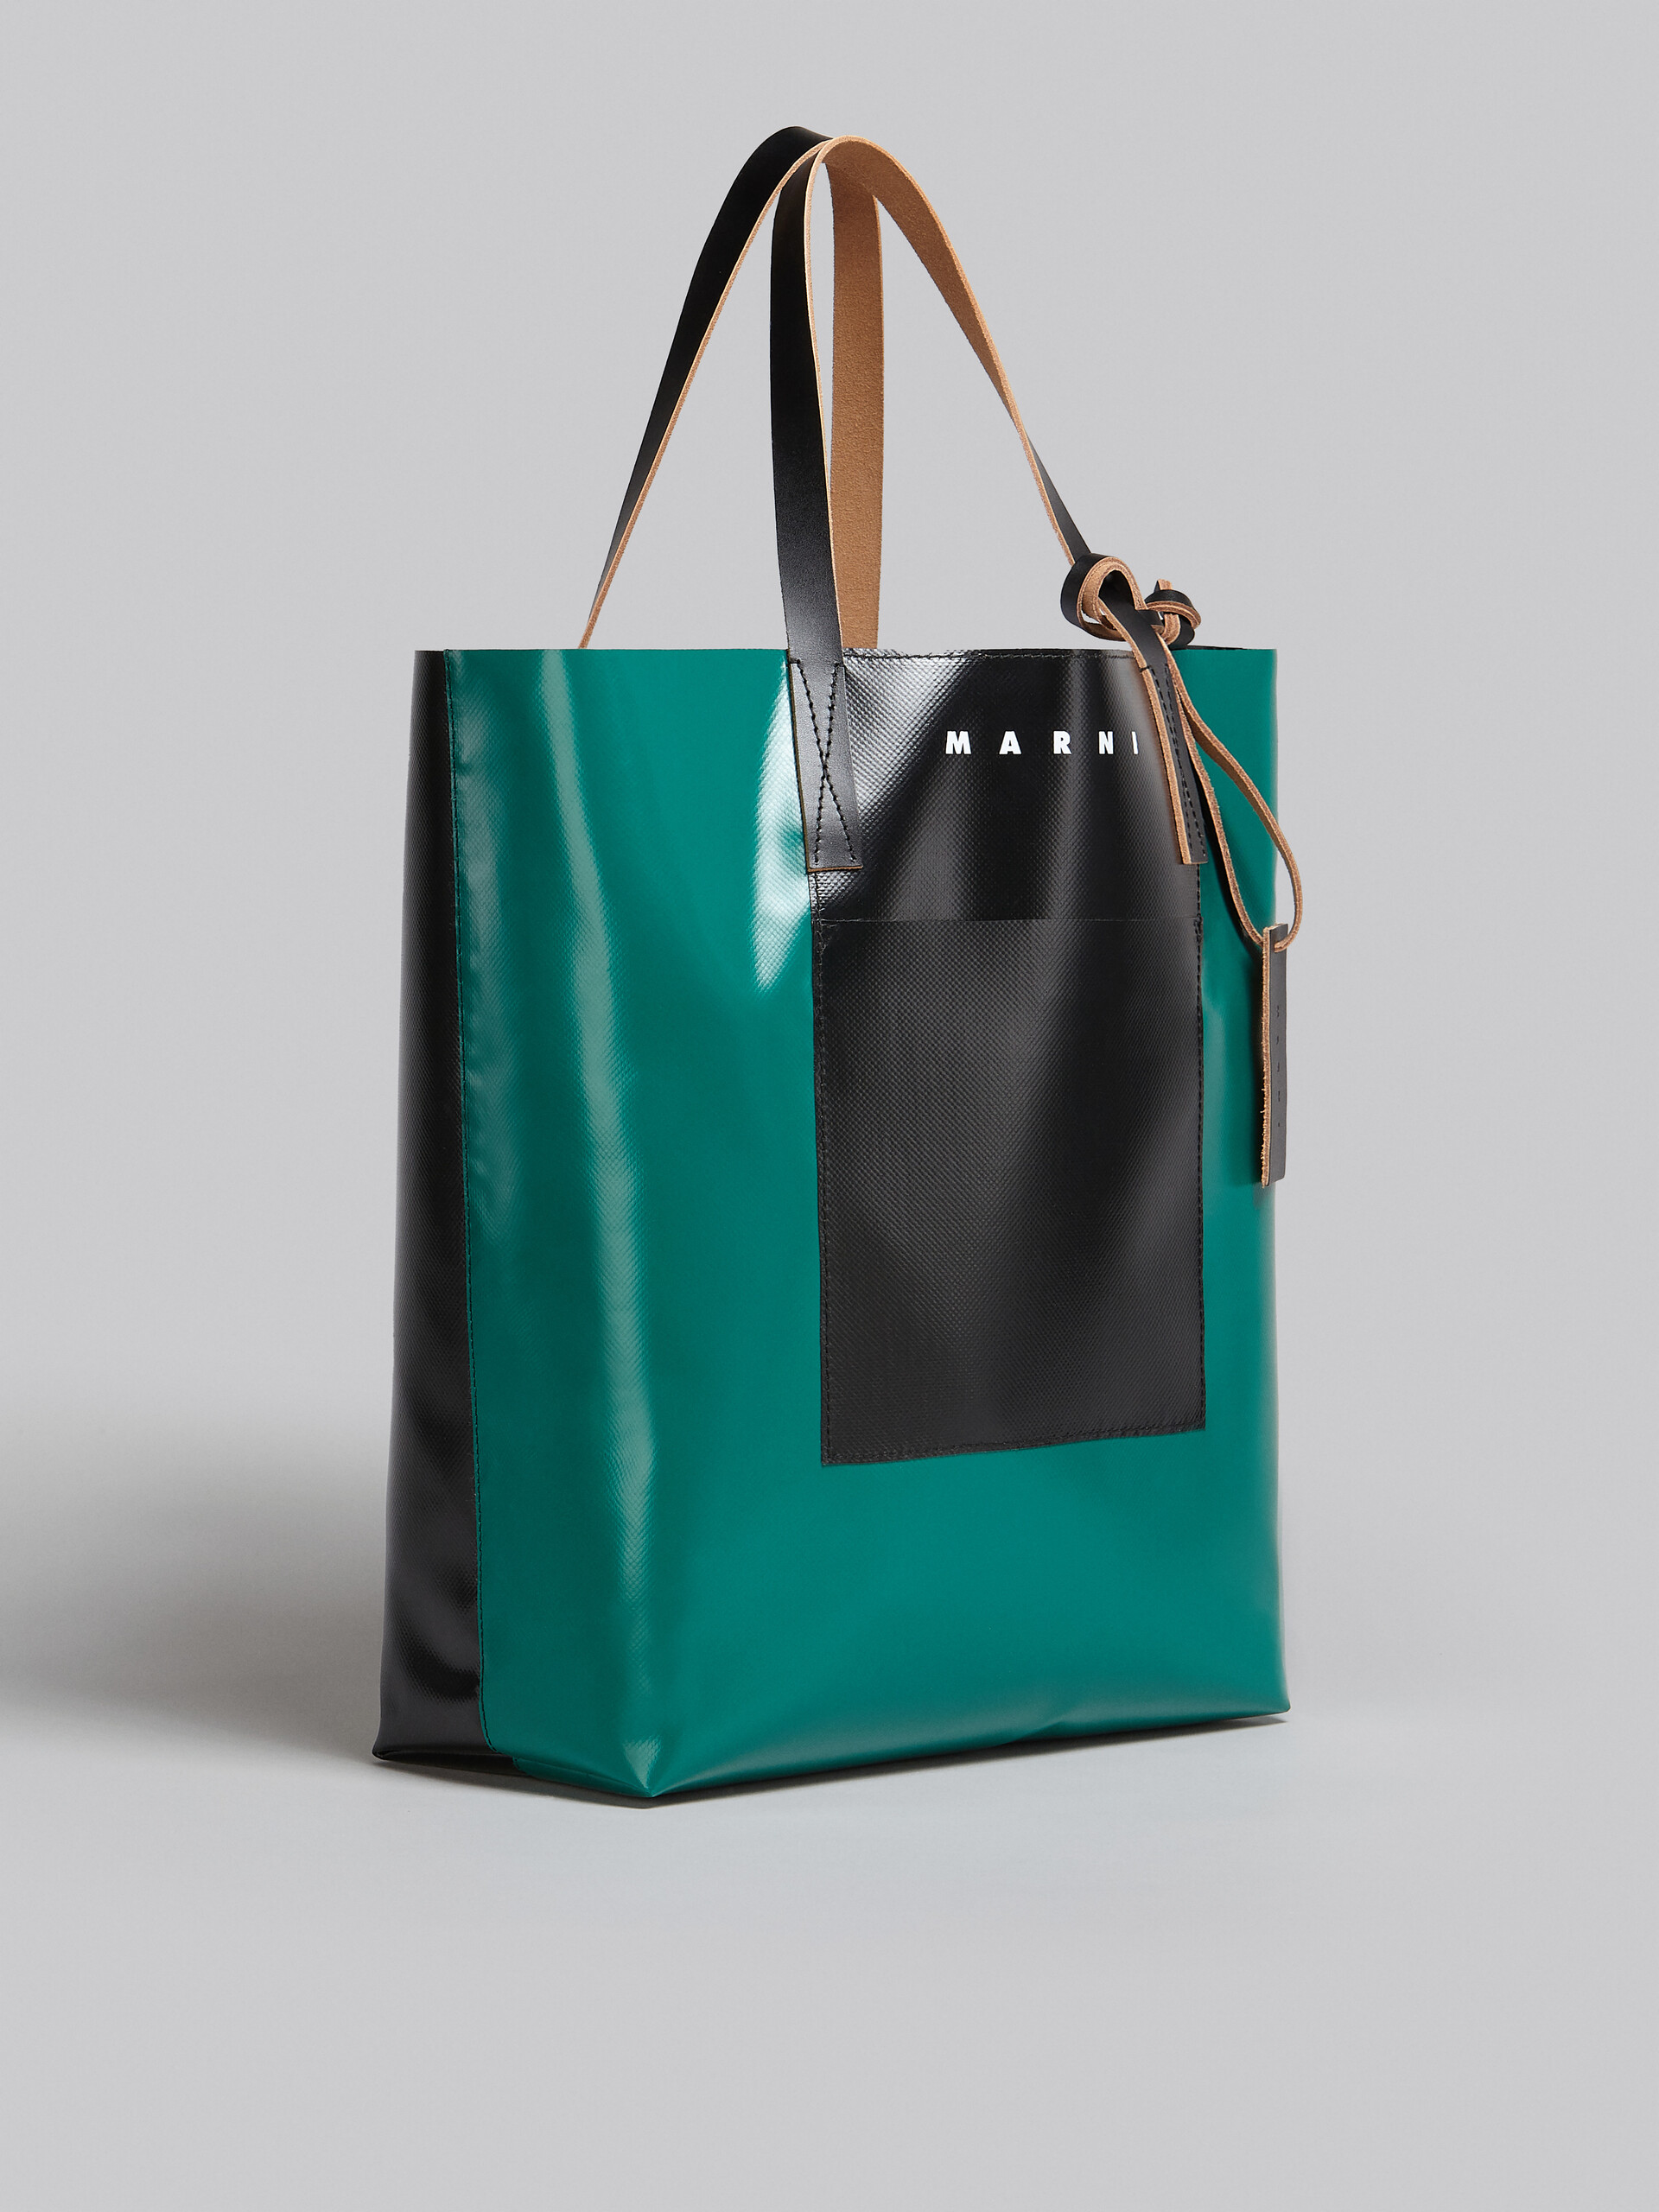 Tribeca Shopping Bag in white and black - Shopping Bags - Image 3